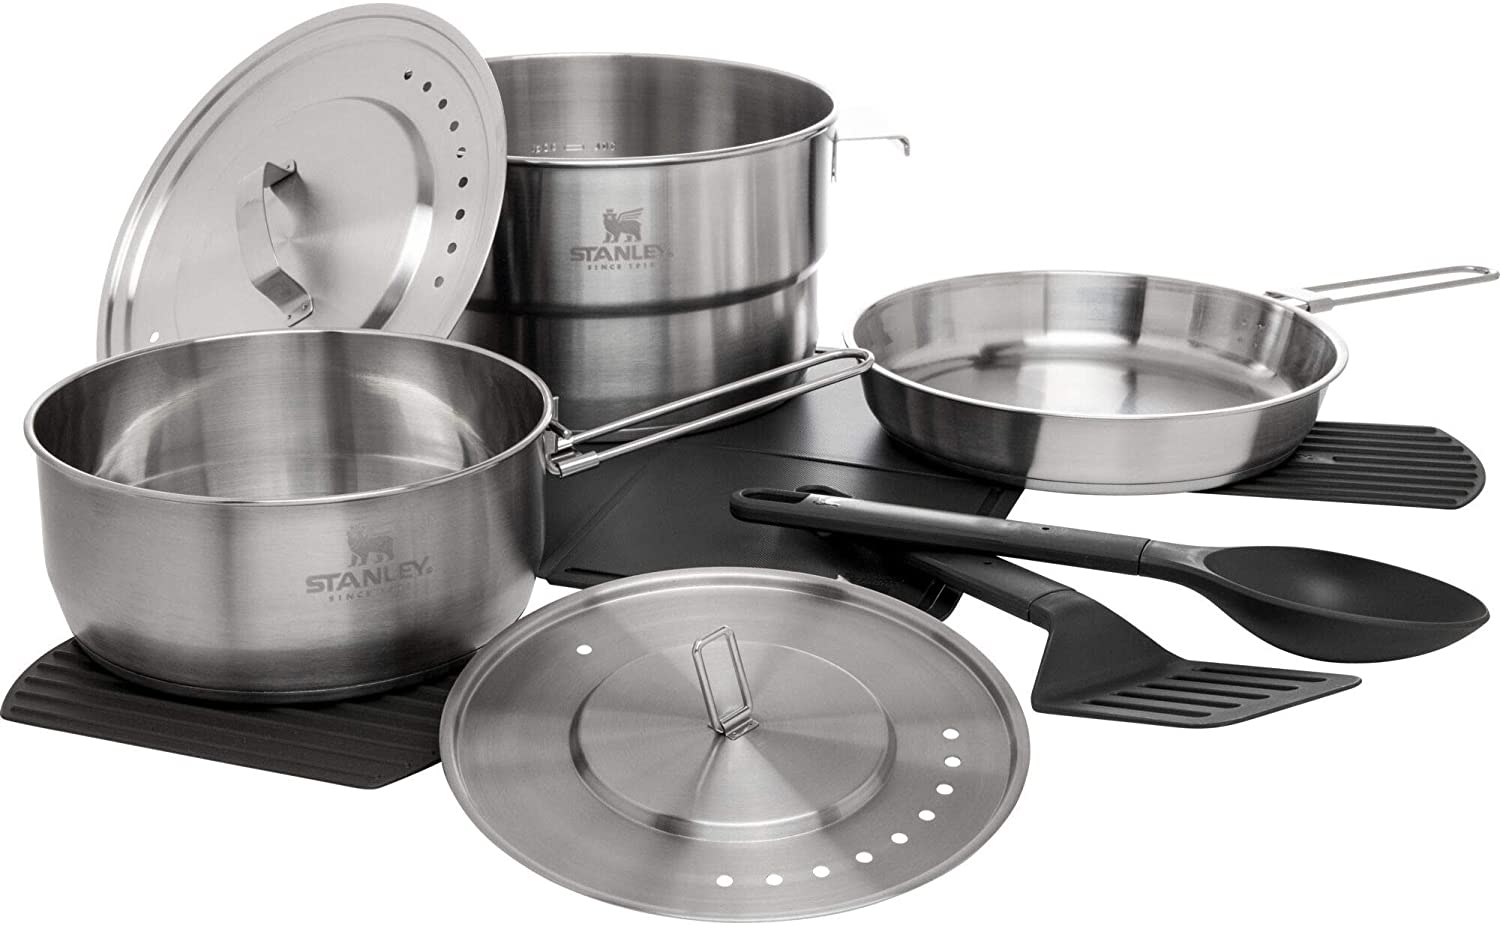 Stanley Even Heat Camp Pro Cookset, 11-Piece Camping Cookware Set